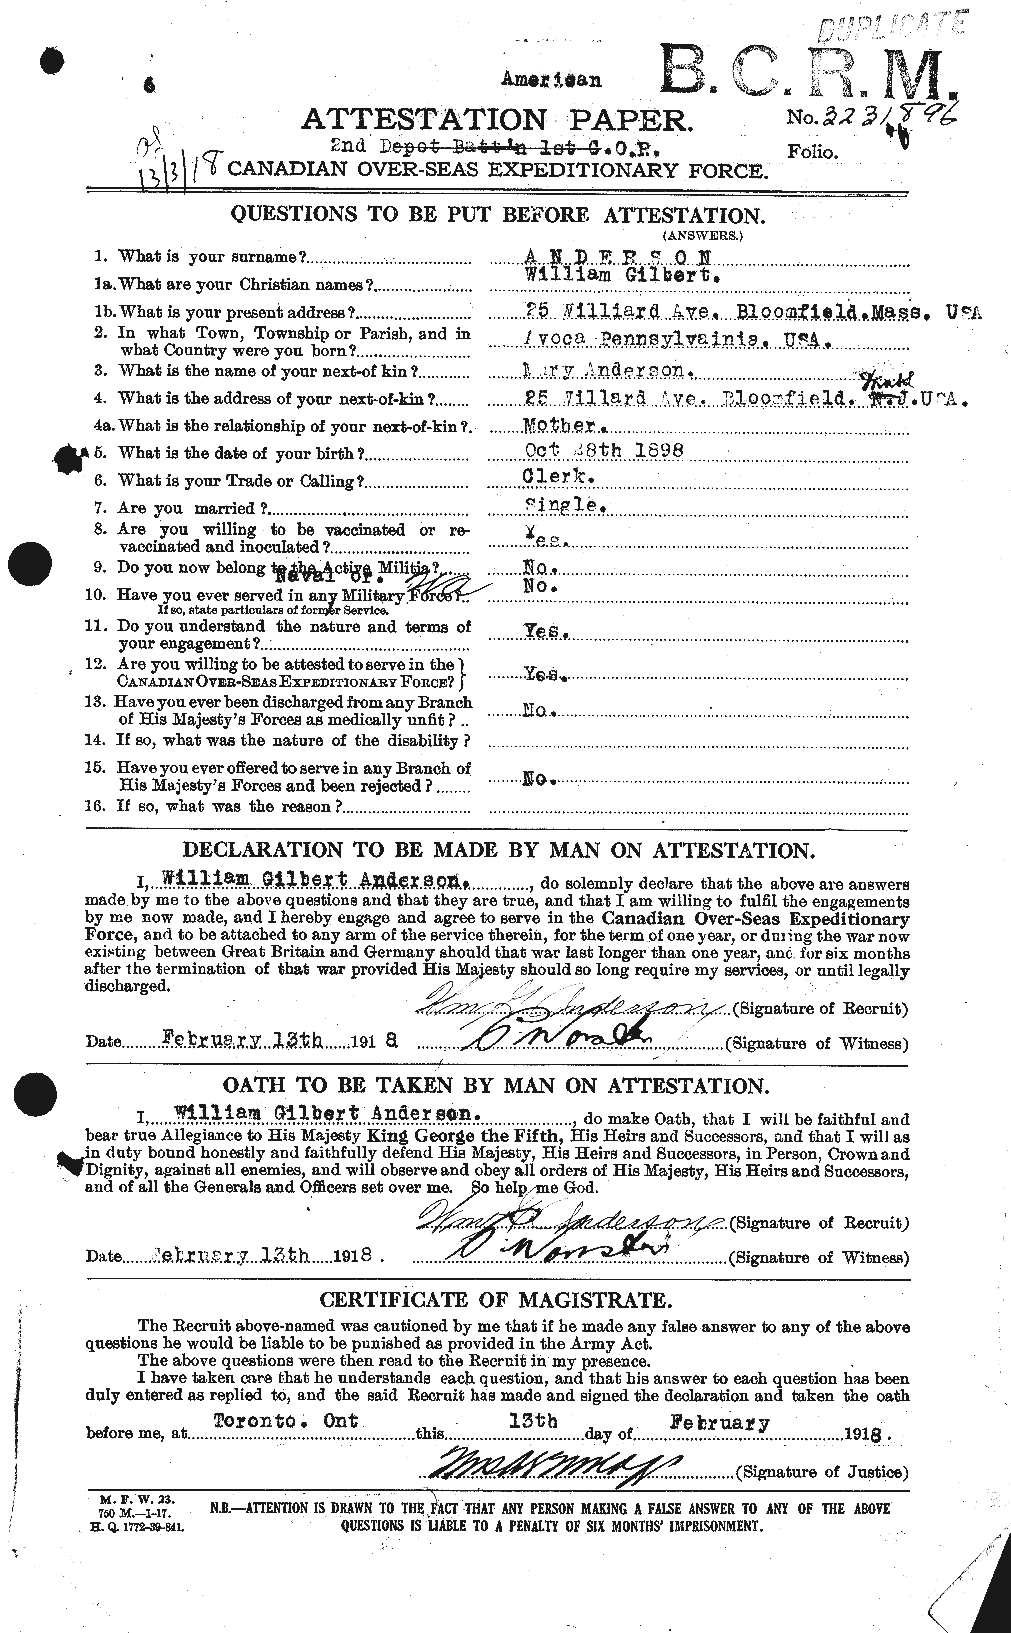 Personnel Records of the First World War - CEF 210796a